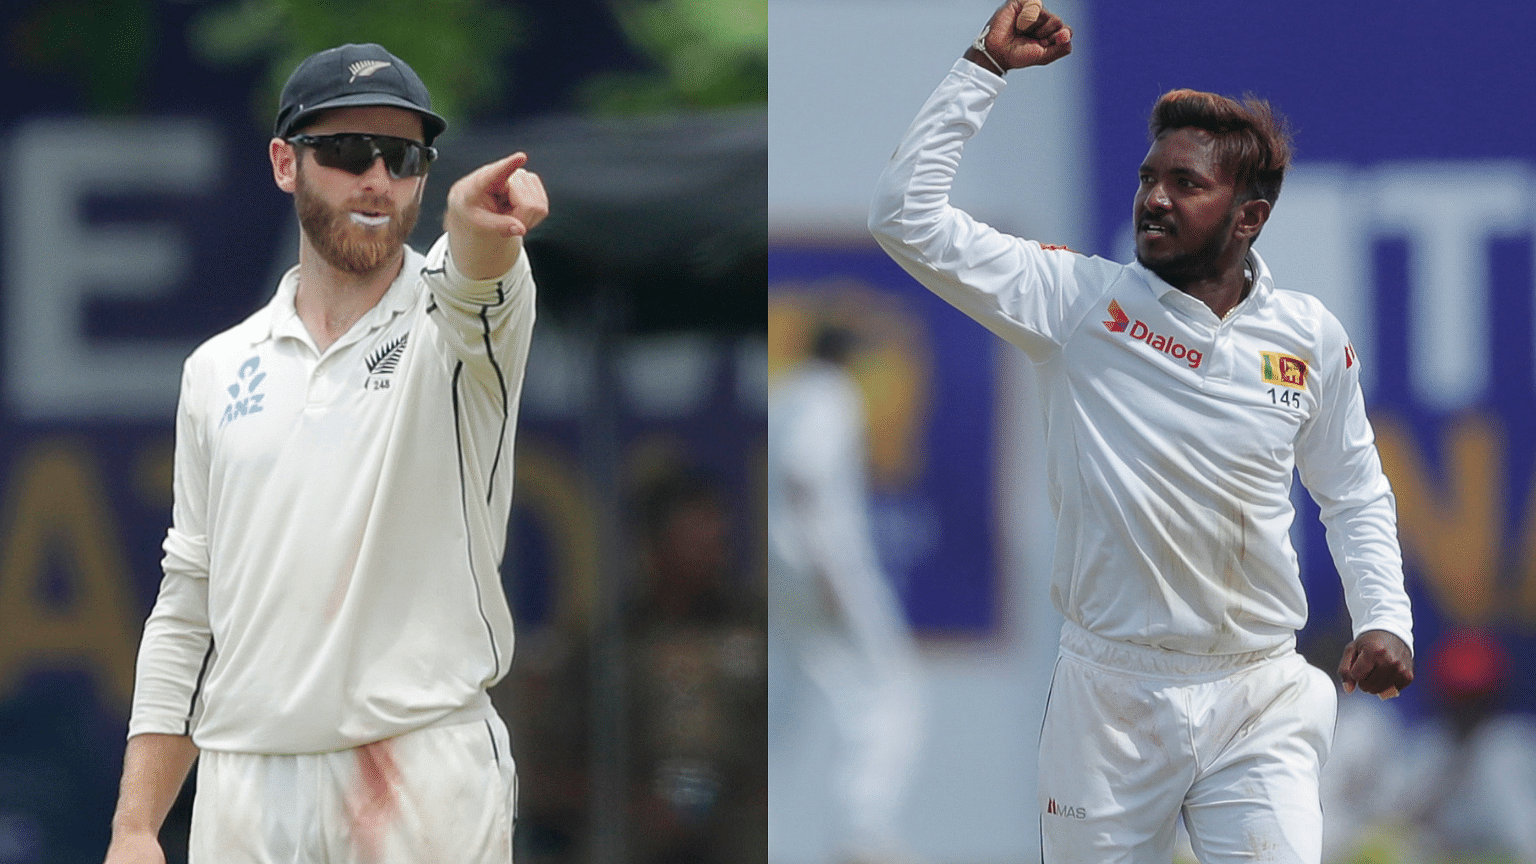 New Zealand captain Kane Williamson and Sri Lanka’s Akila Dananjaya have been reported for suspect bowling action.